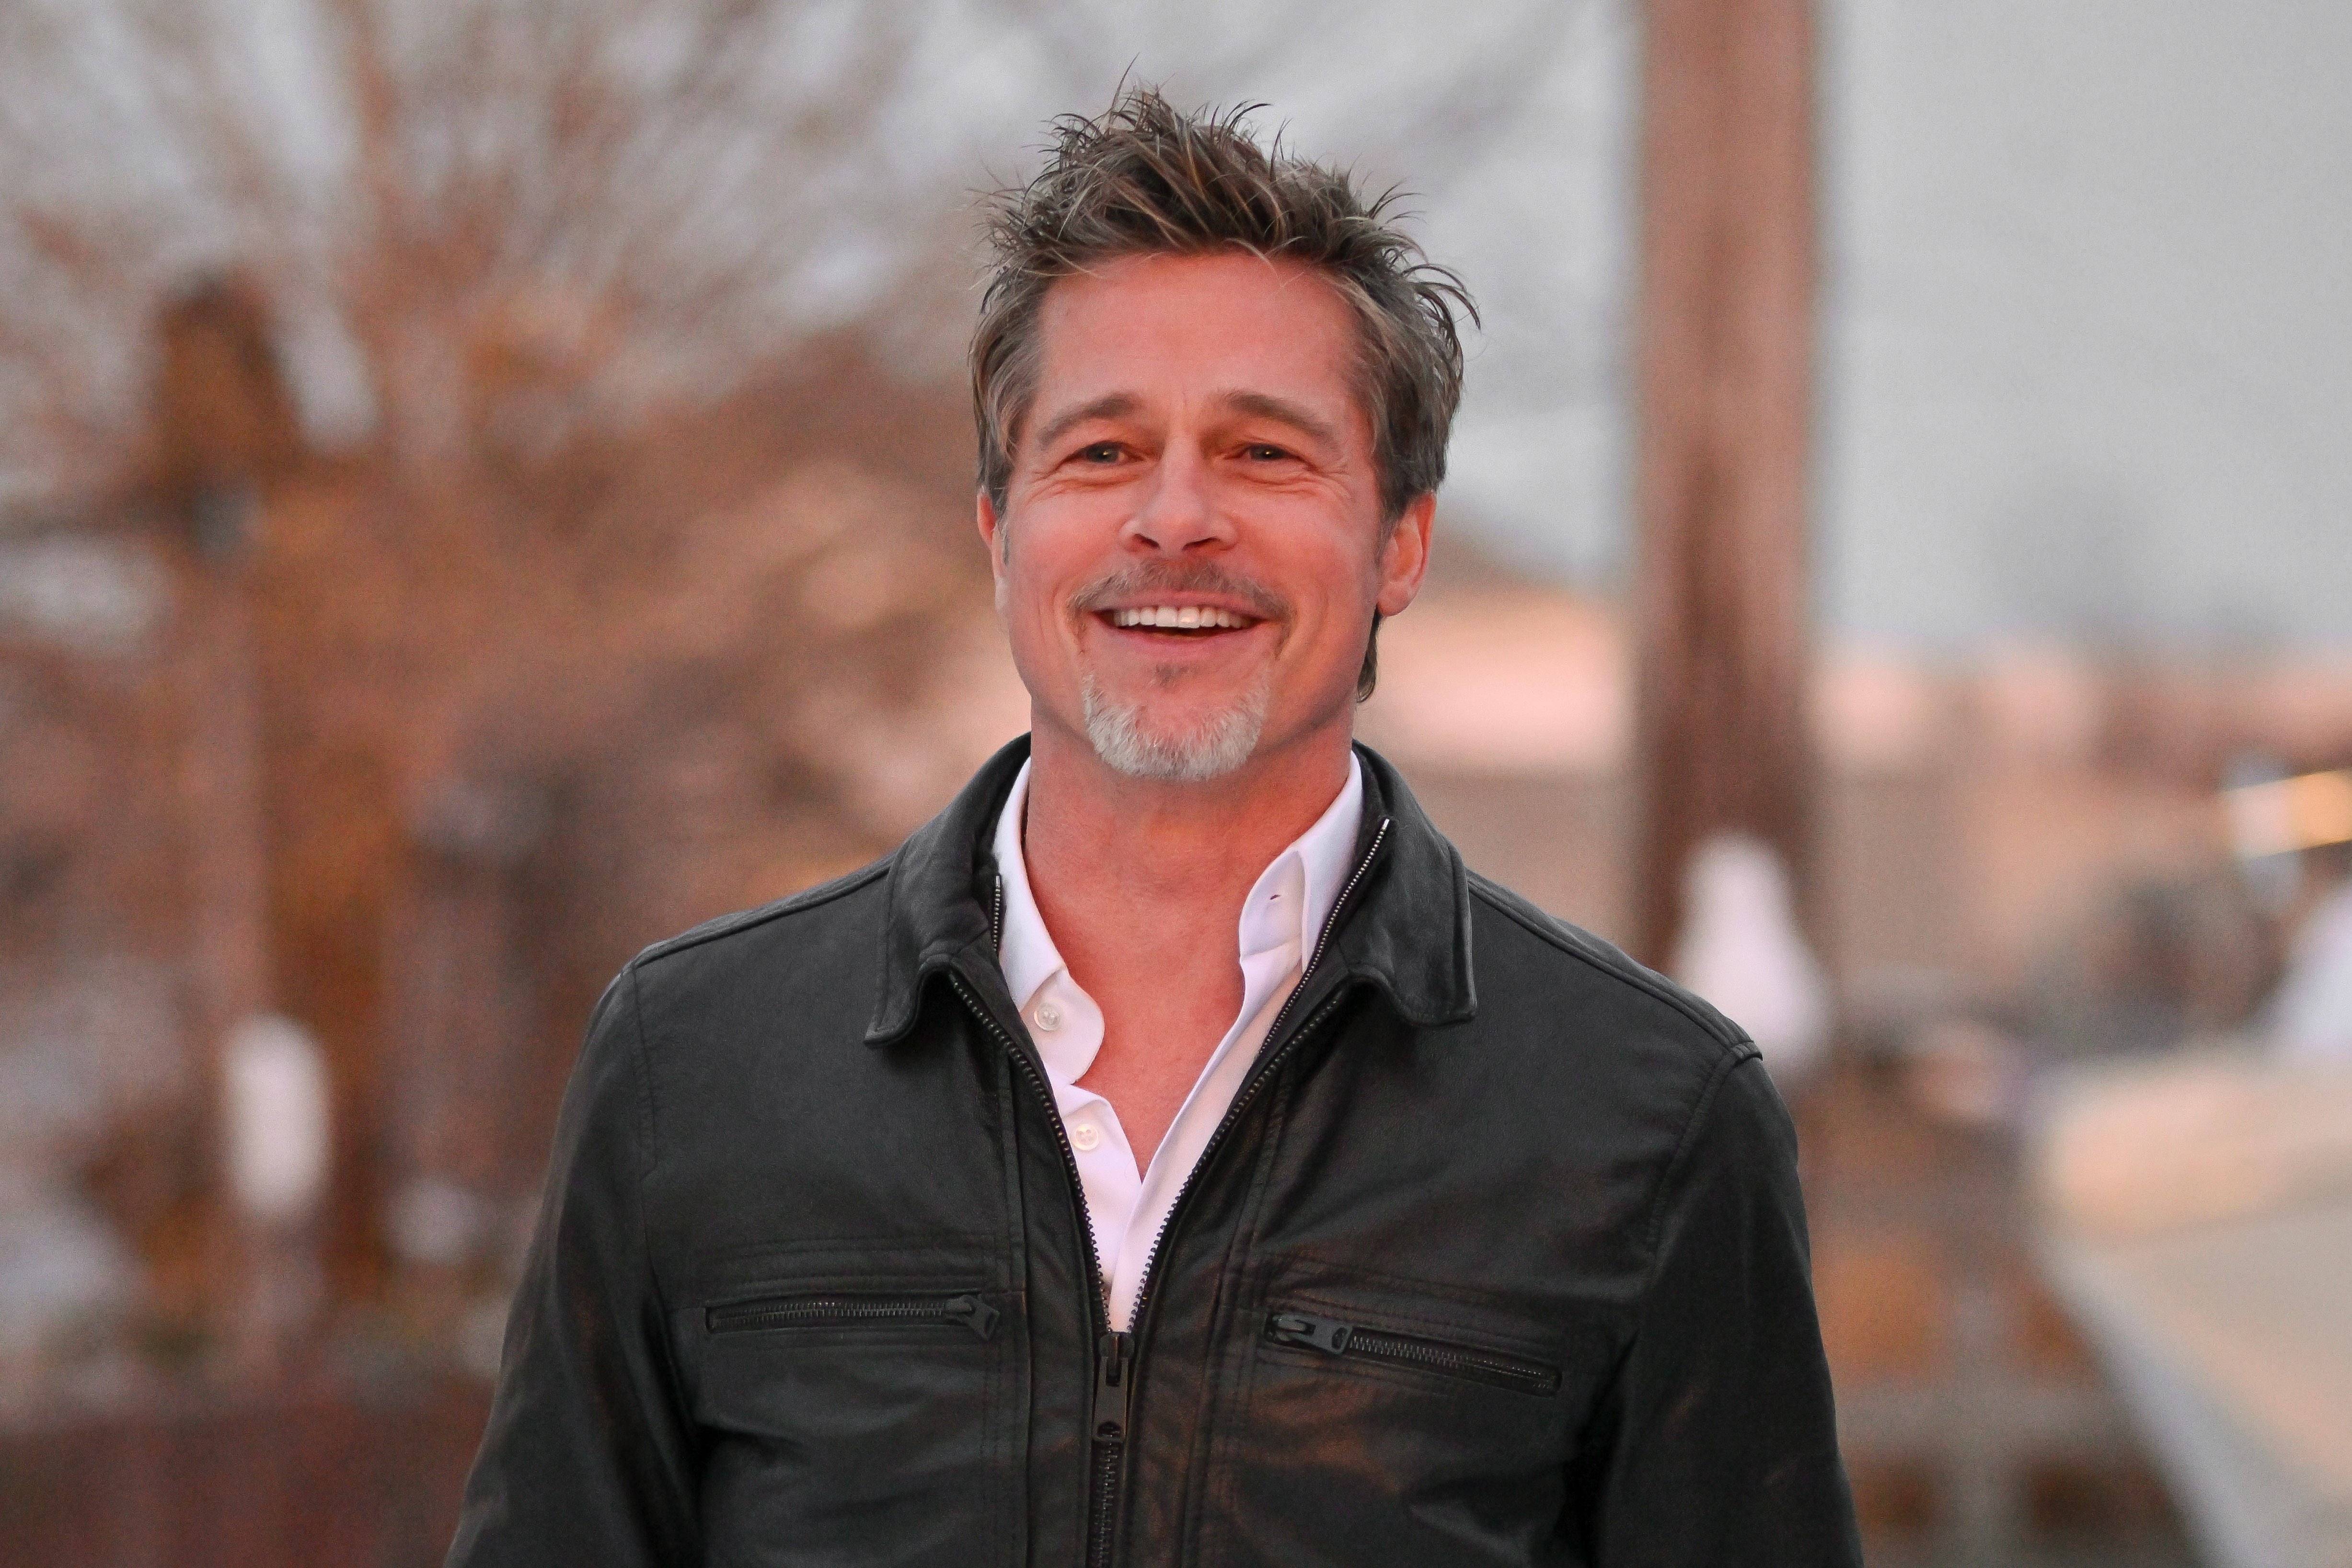 Brad Pitt on the set of "Wolves" in Old Howard Beach on February 13, 2023, in New York City. | Source: Getty Images